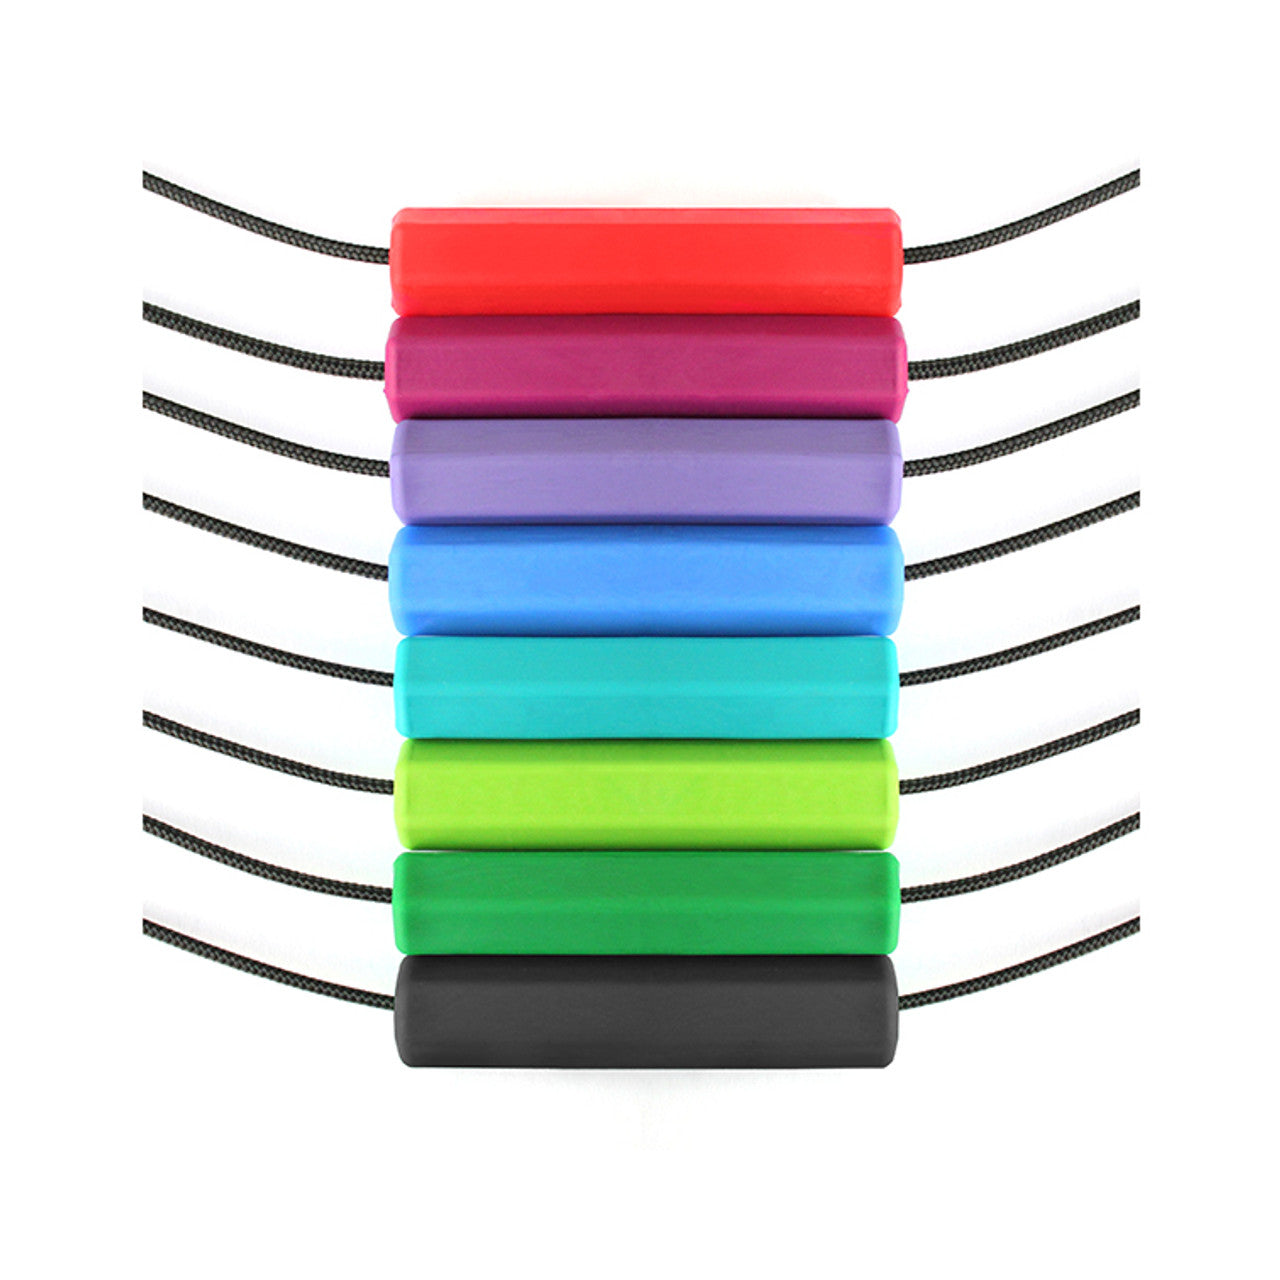 A rainbow assortment of the Krypto-Bite Chewable Tube Necklace.